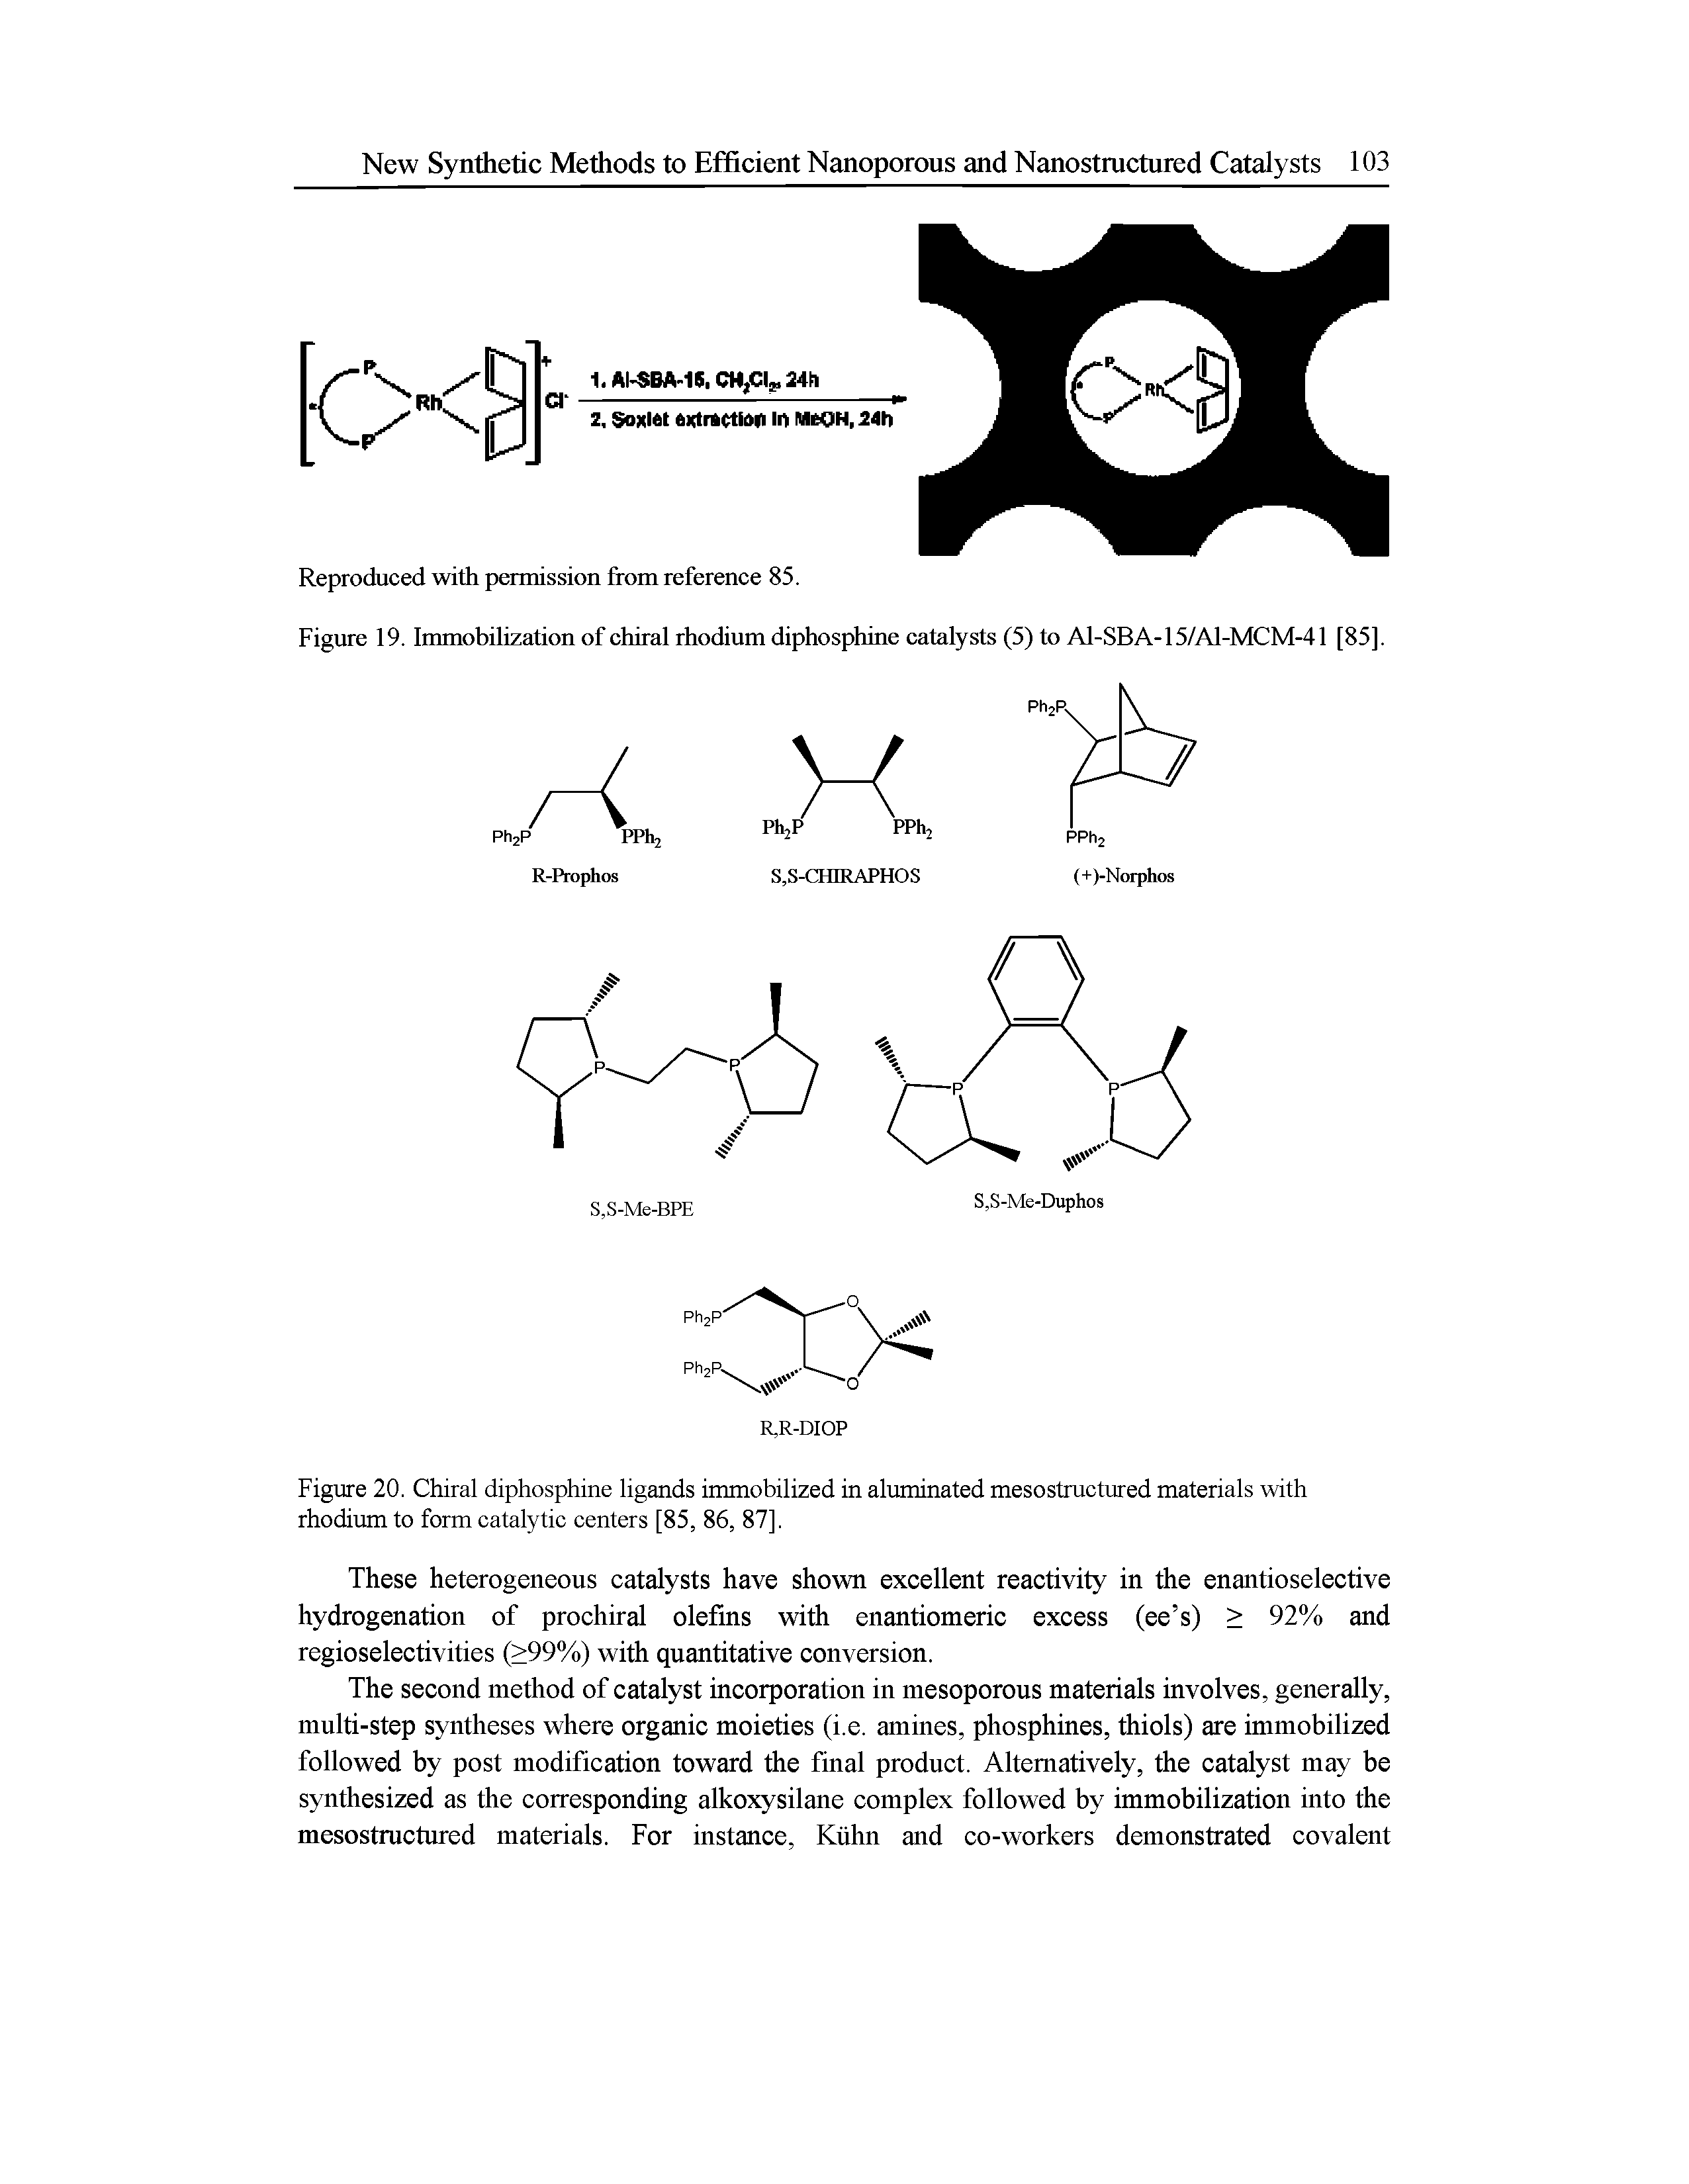 Figure 19. Immobilization of chiral rhodium diphosphine catalysts (5) to A1-SBA-15/A1-MCM-41 [85].